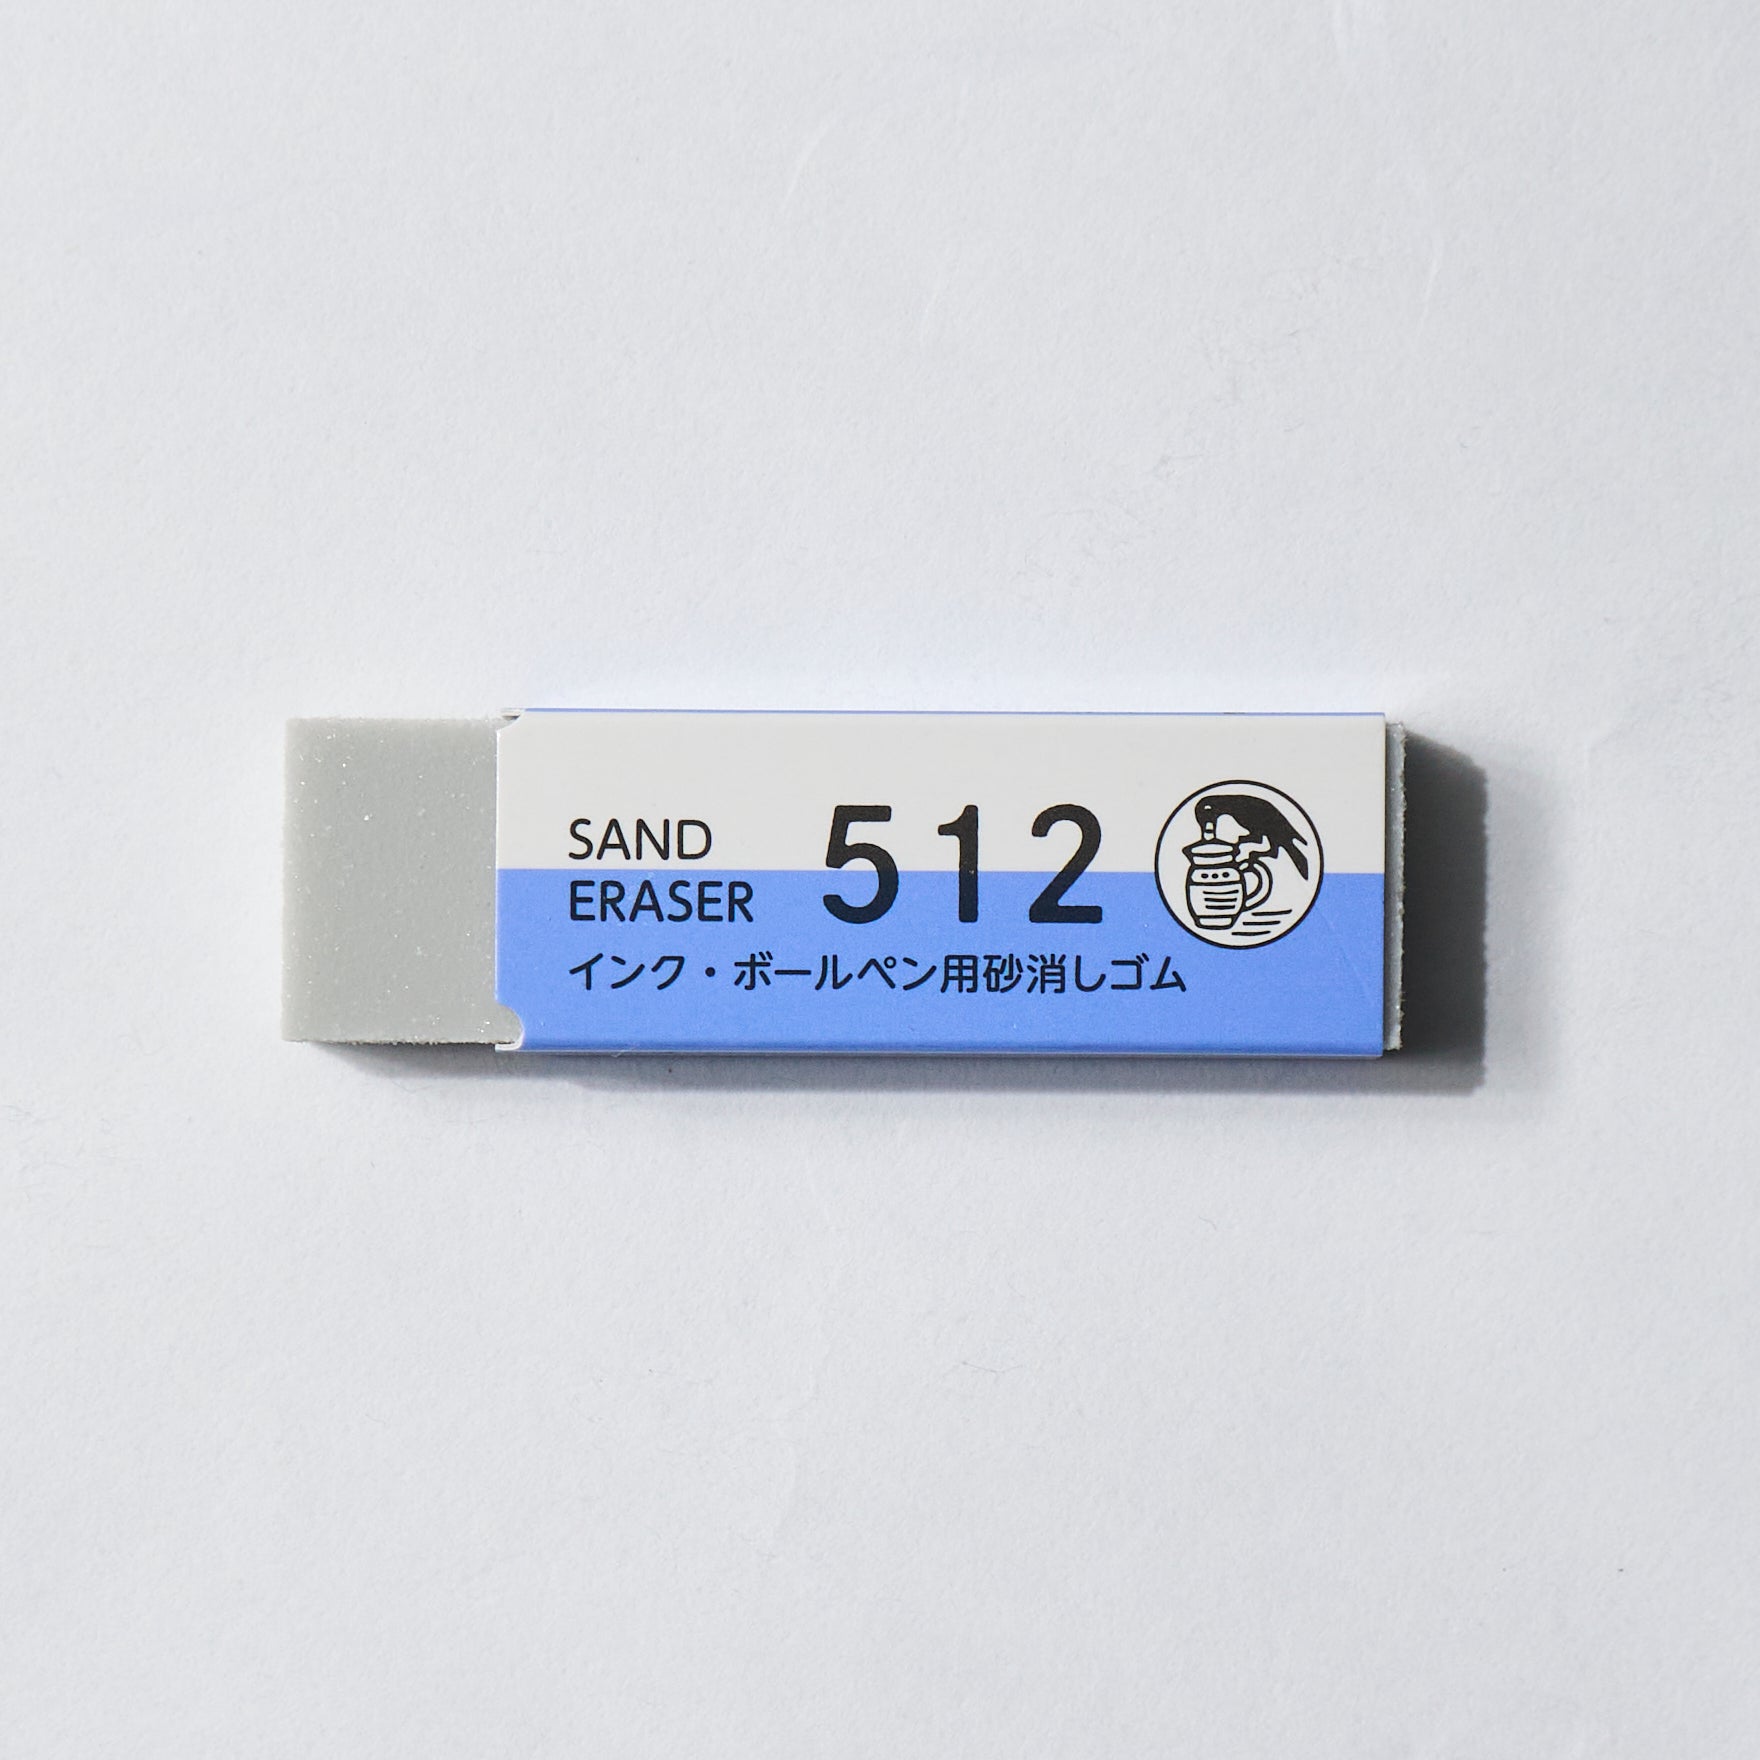 [CLEARANCE] Sand Eraser 512 for Ink & Ballpoint Pen / SEED